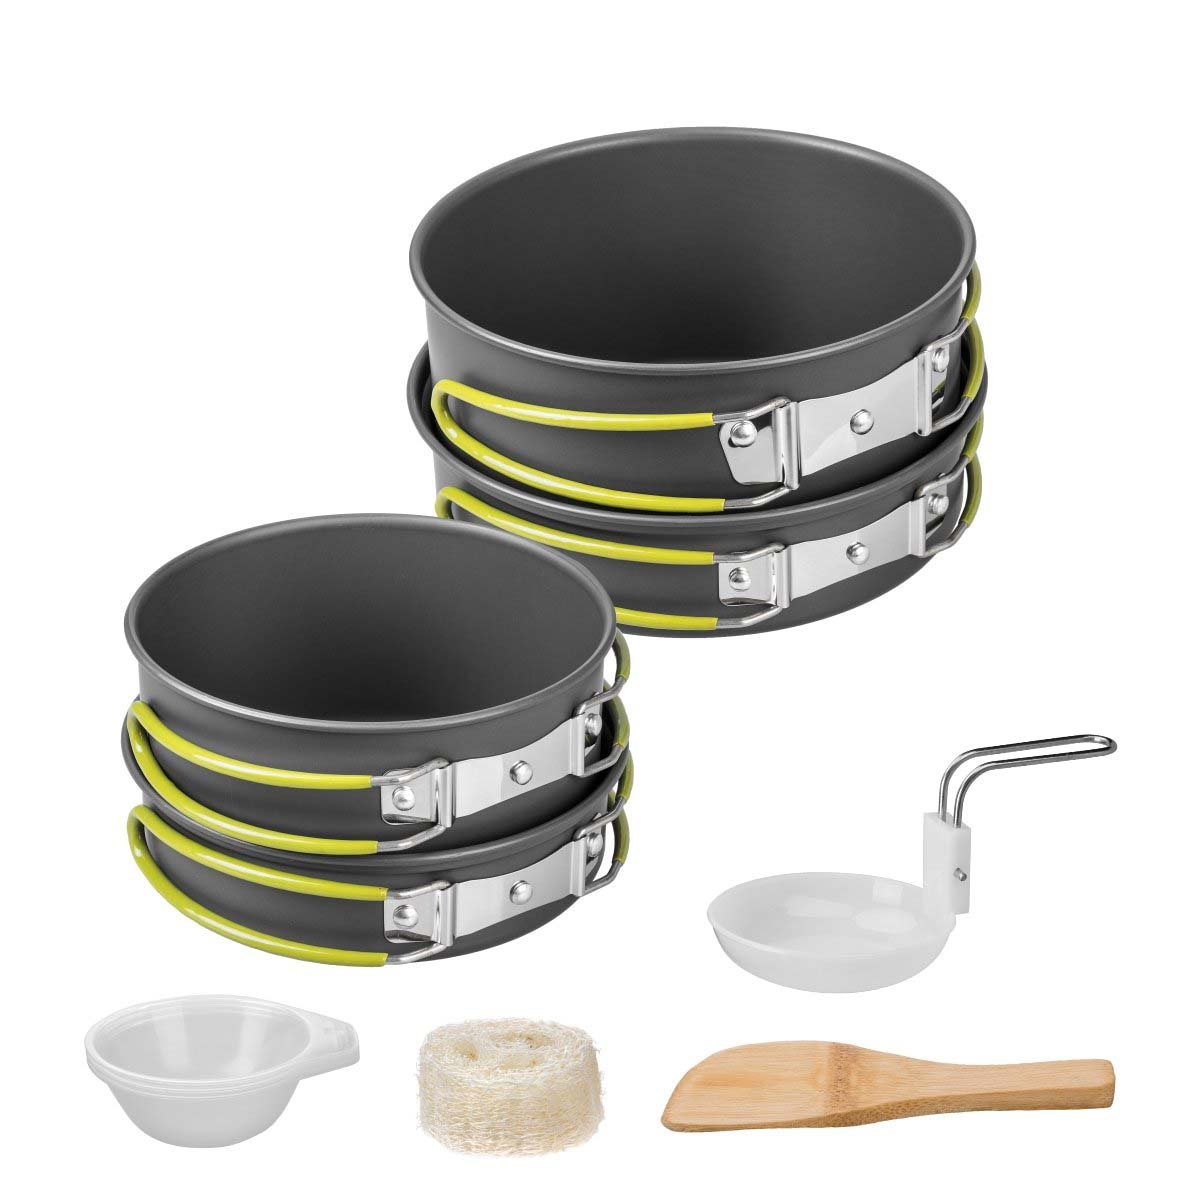 Outdoor Cooking Set for Camping, Compact Cookware